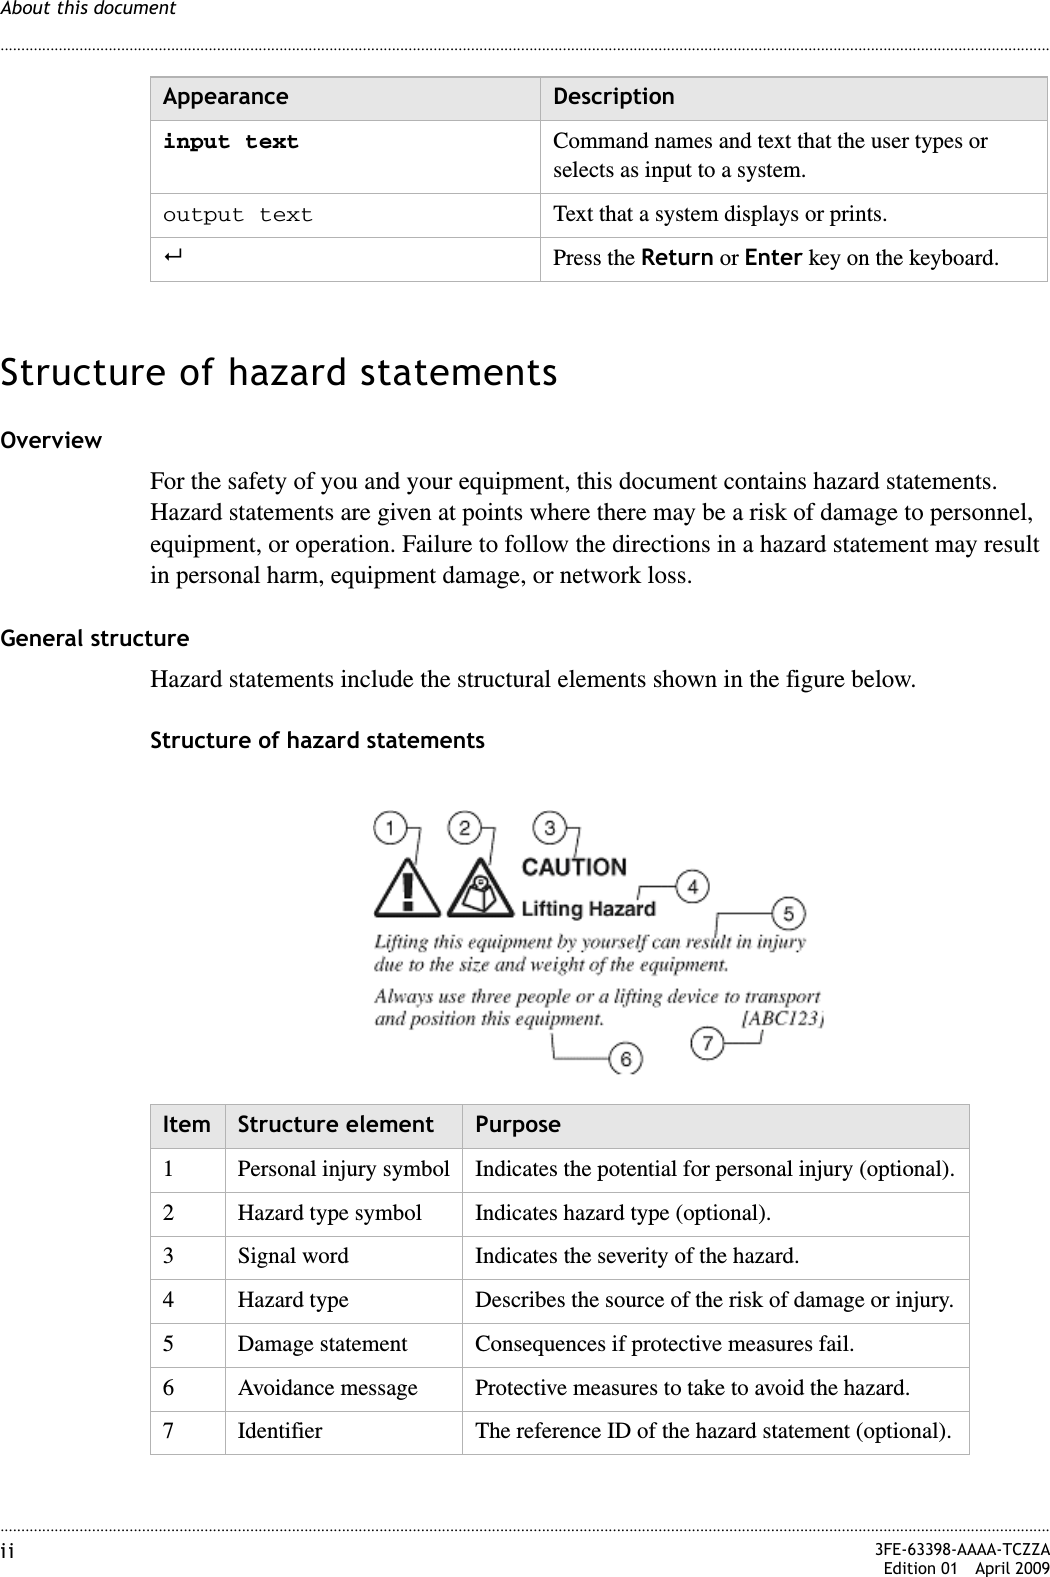 ............................................................................................................................................................................................................................................................About this documentii  3FE-63398-AAAA-TCZZAEdition 01 April 2009............................................................................................................................................................................................................................................................Structure of hazard statementsOverviewFor the safety of you and your equipment, this document contains hazard statements. Hazard statements are given at points where there may be a risk of damage to personnel, equipment, or operation. Failure to follow the directions in a hazard statement may result in personal harm, equipment damage, or network loss.General structureHazard statements include the structural elements shown in the figure below.Structure of hazard statementsinput text Command names and text that the user types or selects as input to a system.output text Text that a system displays or prints.!Press the Return or Enter key on the keyboard.Appearance DescriptionItem Structure element Purpose1 Personal injury symbol Indicates the potential for personal injury (optional).2 Hazard type symbol Indicates hazard type (optional).3 Signal word Indicates the severity of the hazard.4 Hazard type Describes the source of the risk of damage or injury.5 Damage statement Consequences if protective measures fail.6 Avoidance message Protective measures to take to avoid the hazard.7 Identifier The reference ID of the hazard statement (optional).